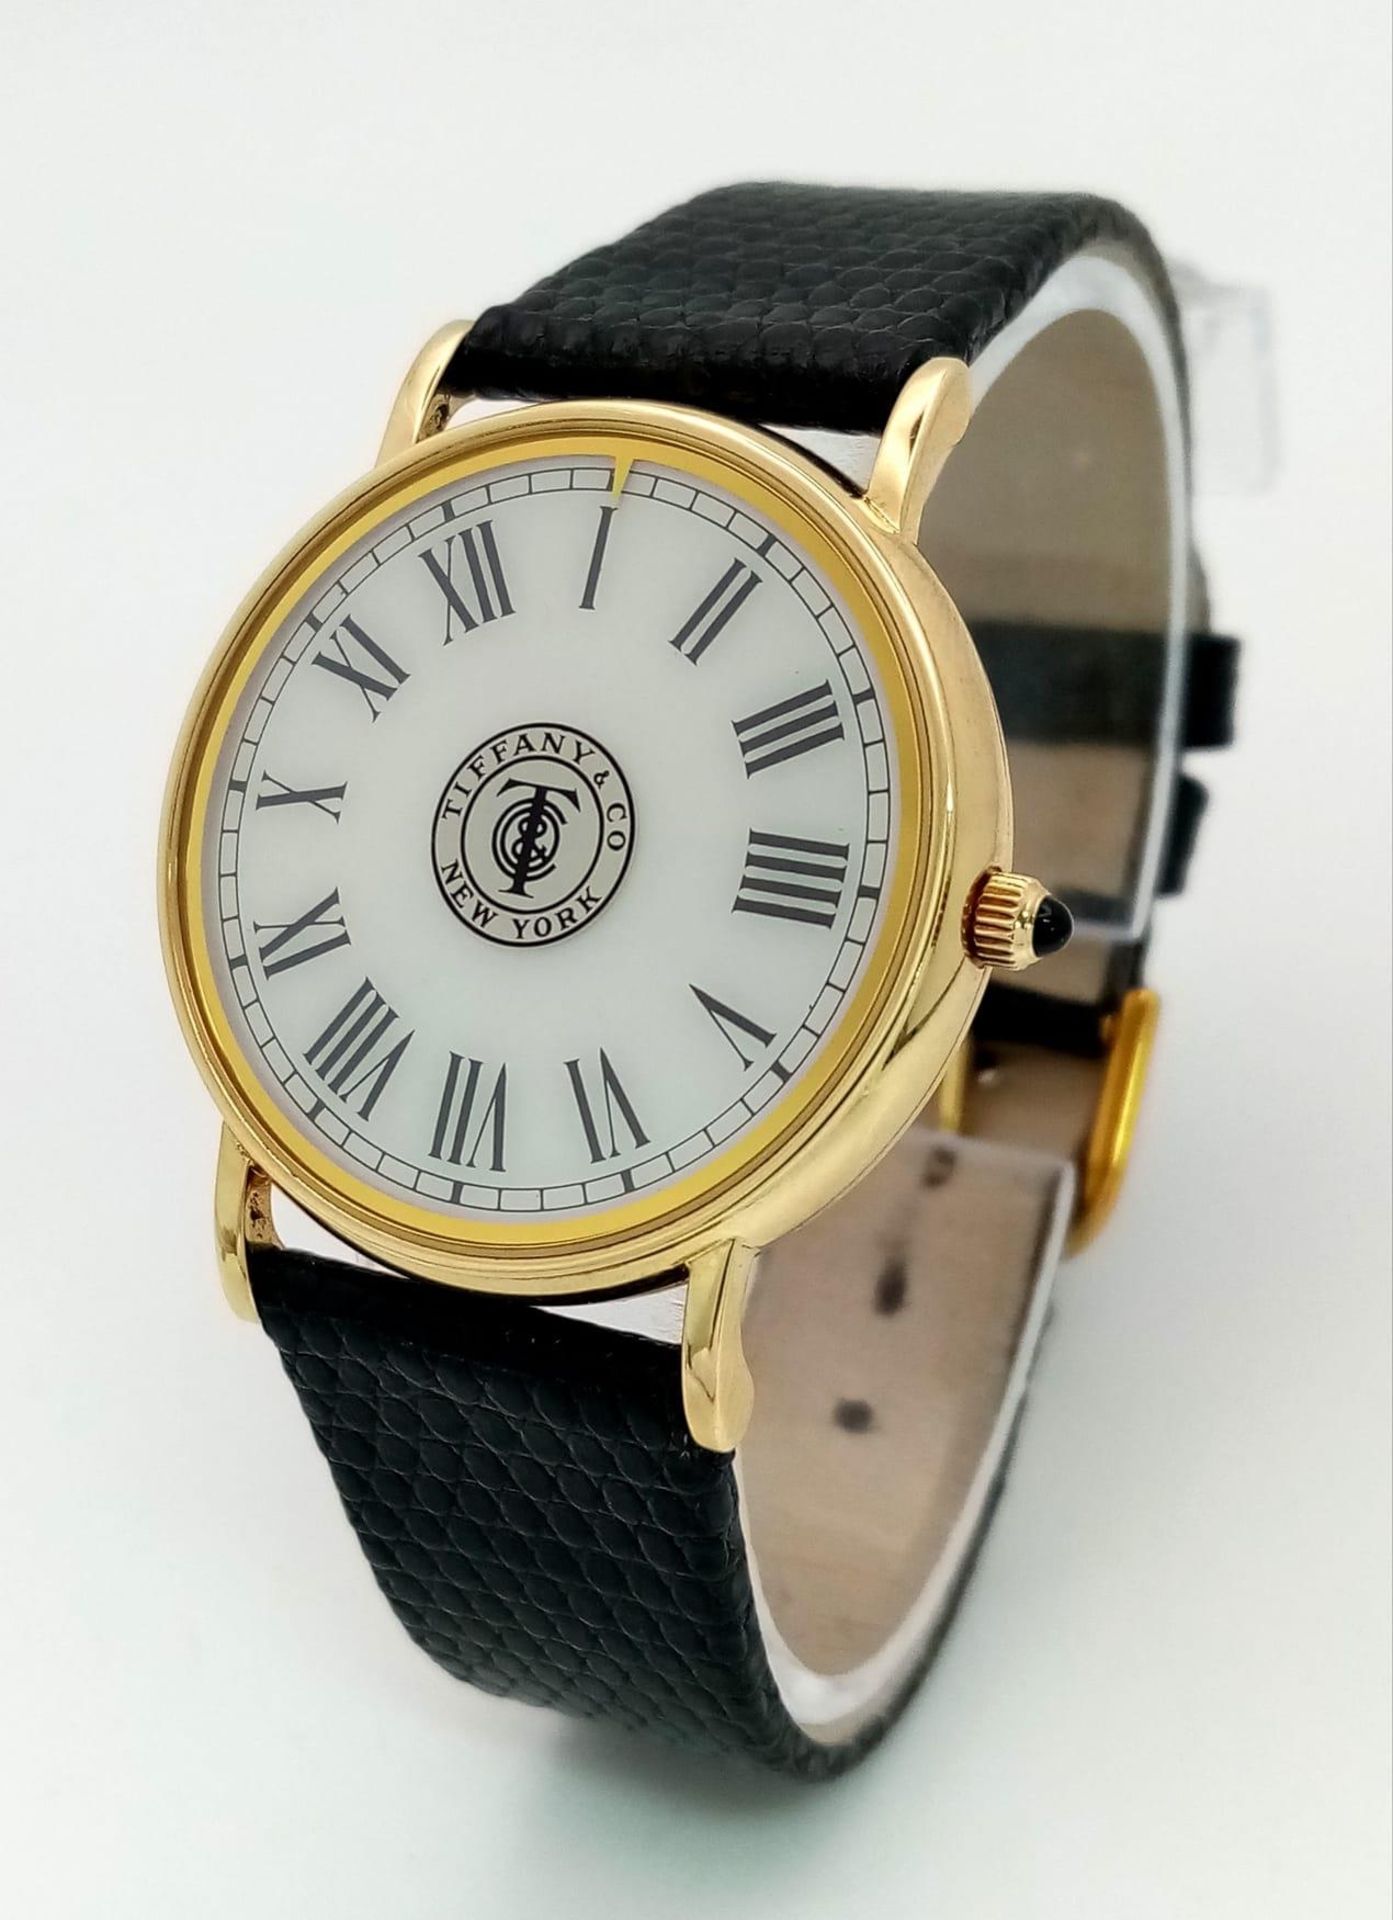 A Vintage 14K Gold Cased Tiffany and Co Ladies 'No Hands' Watch. Black leather strap. 14k gold